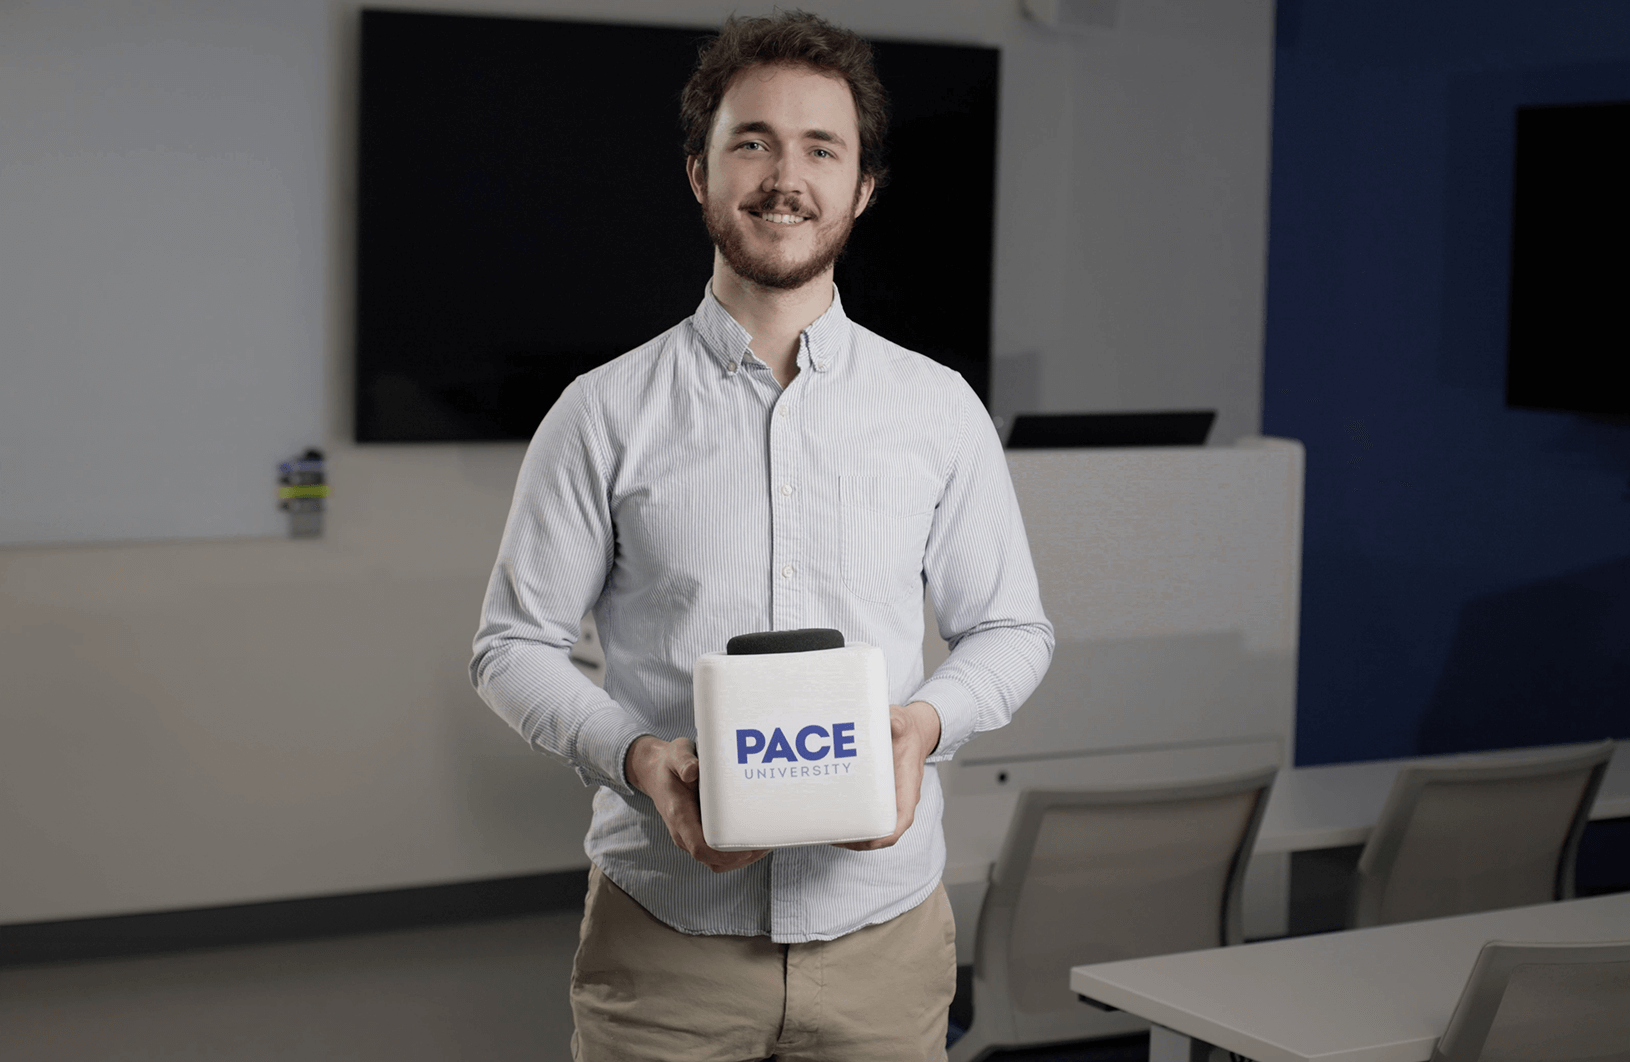 Educational media specialist Braford Terry from Pace University holding customized Catchbox Cube microphone